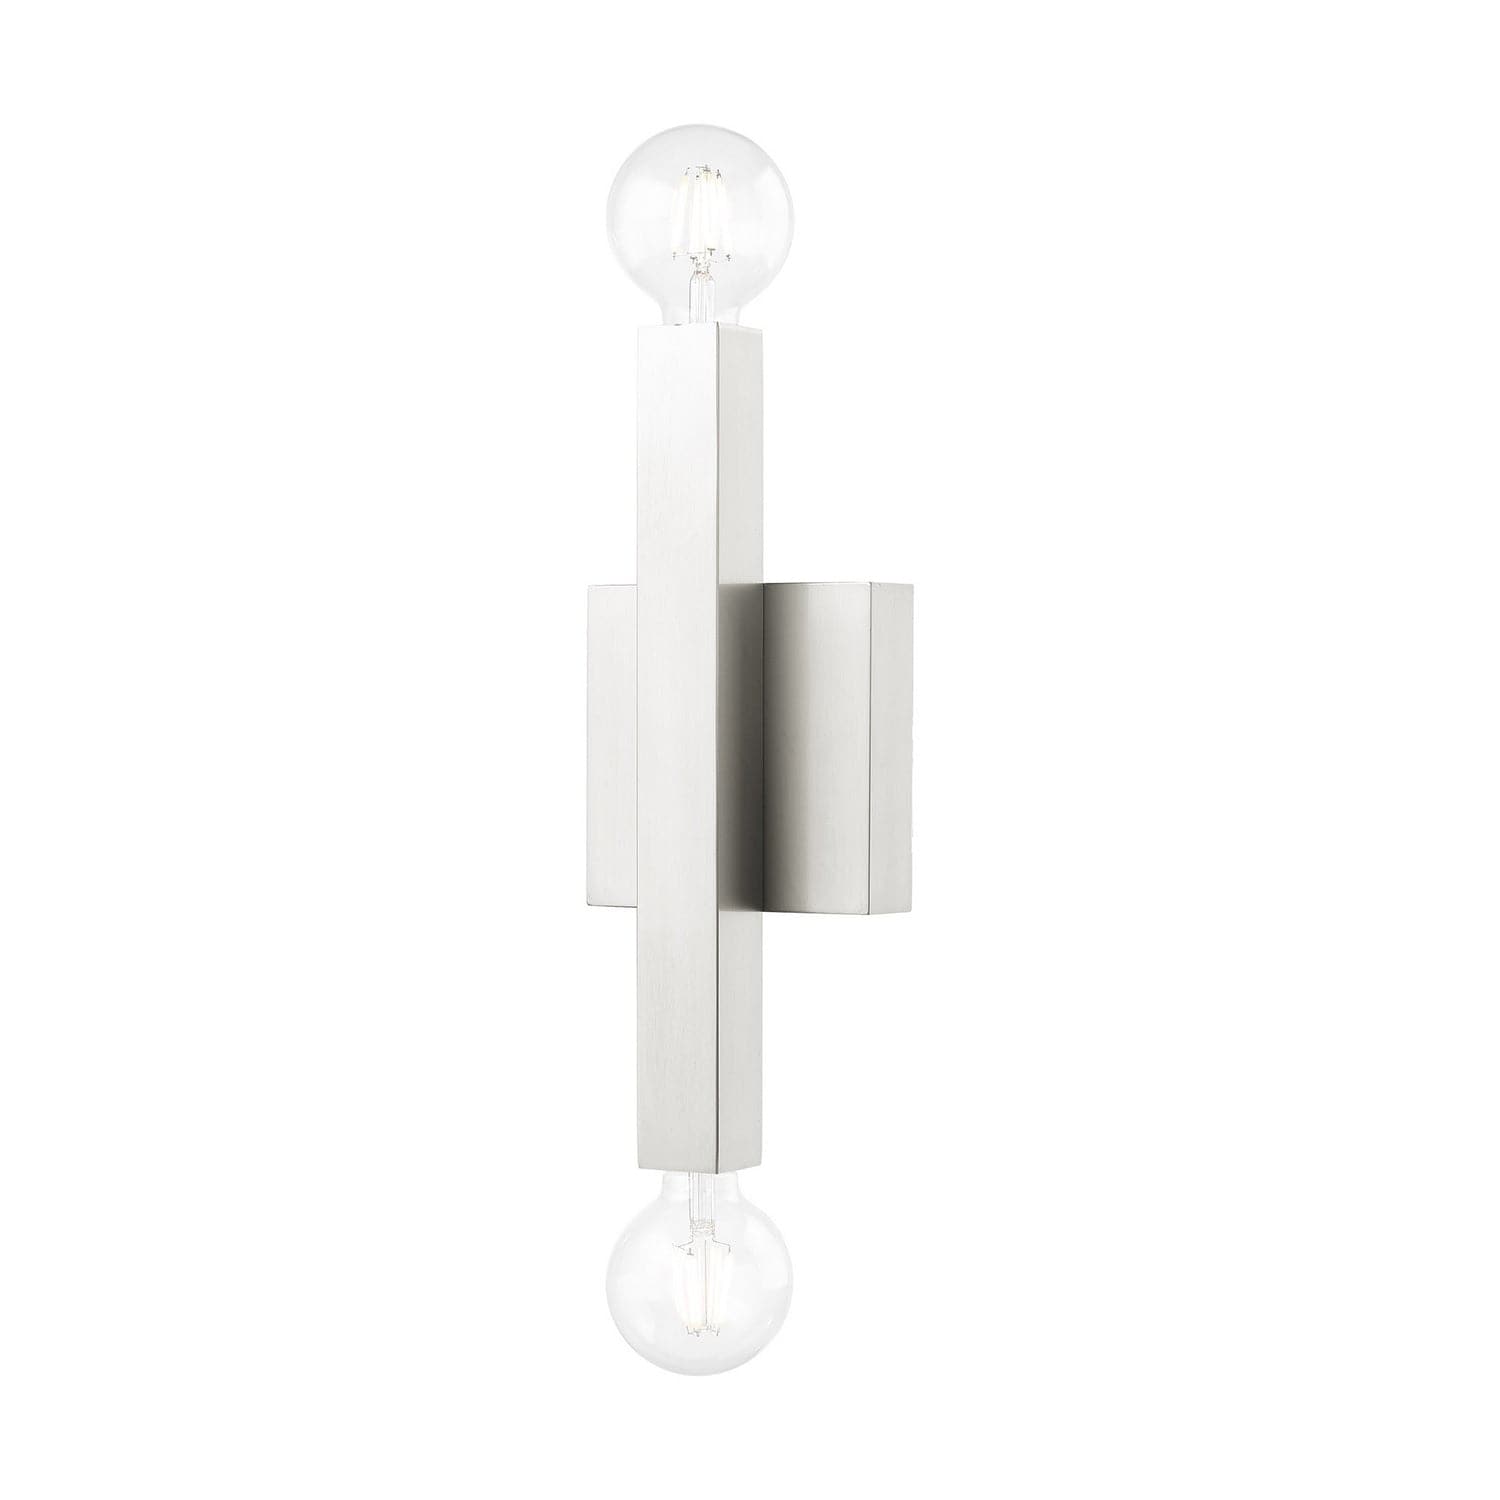 Livex Lighting - 49212-91 - Two Light Wall Sconce - Solna - Brushed Nickel